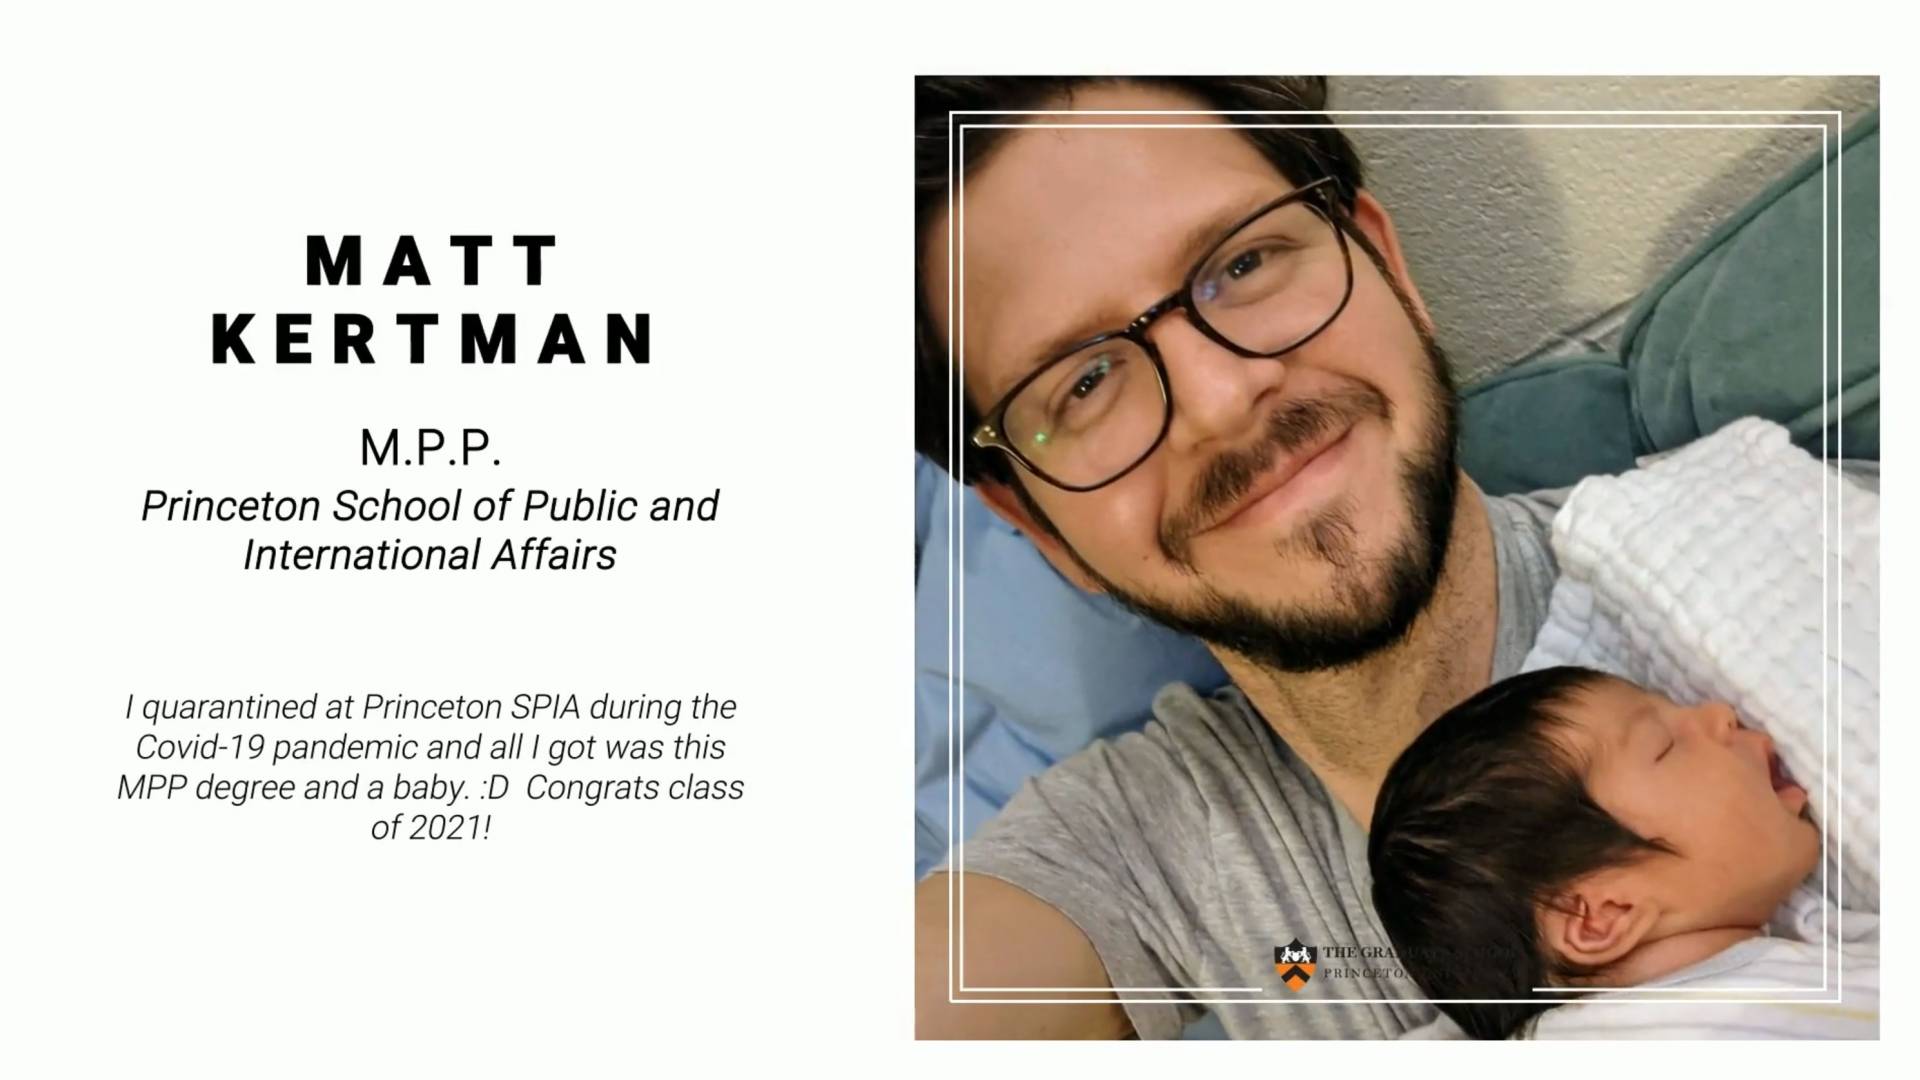 Matt Kertman, MPP Princeton School of Public and International Affairs. I quarantined at Princeton SPIA during the Covid-19 pandemic and all I got was this MPP degree and a baby. :D Congrats class of 2021!